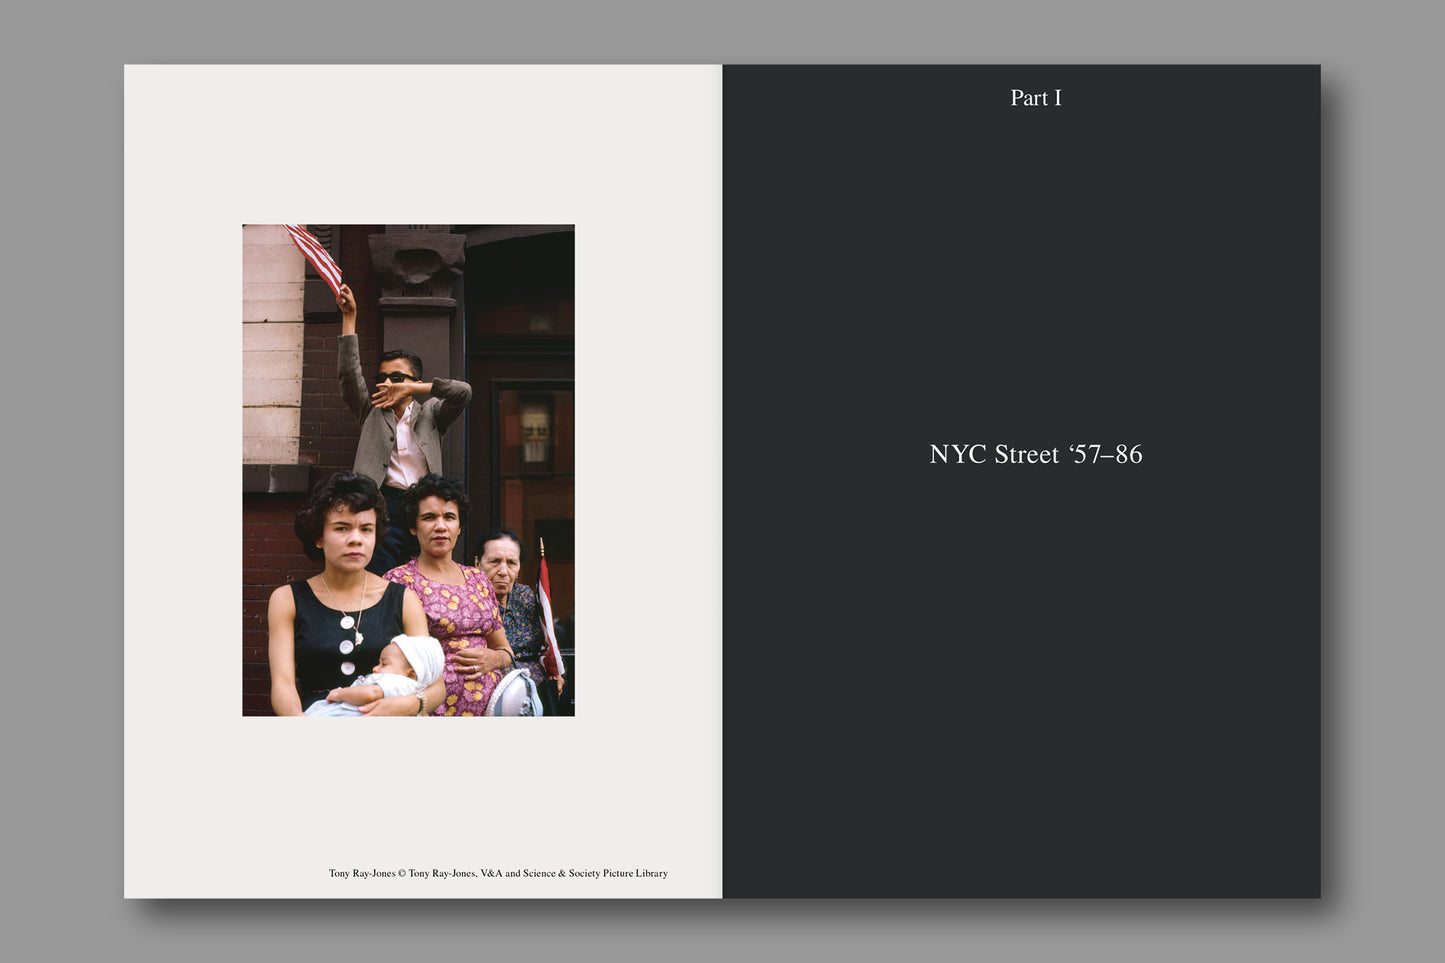 Issue 204: NYC Streets